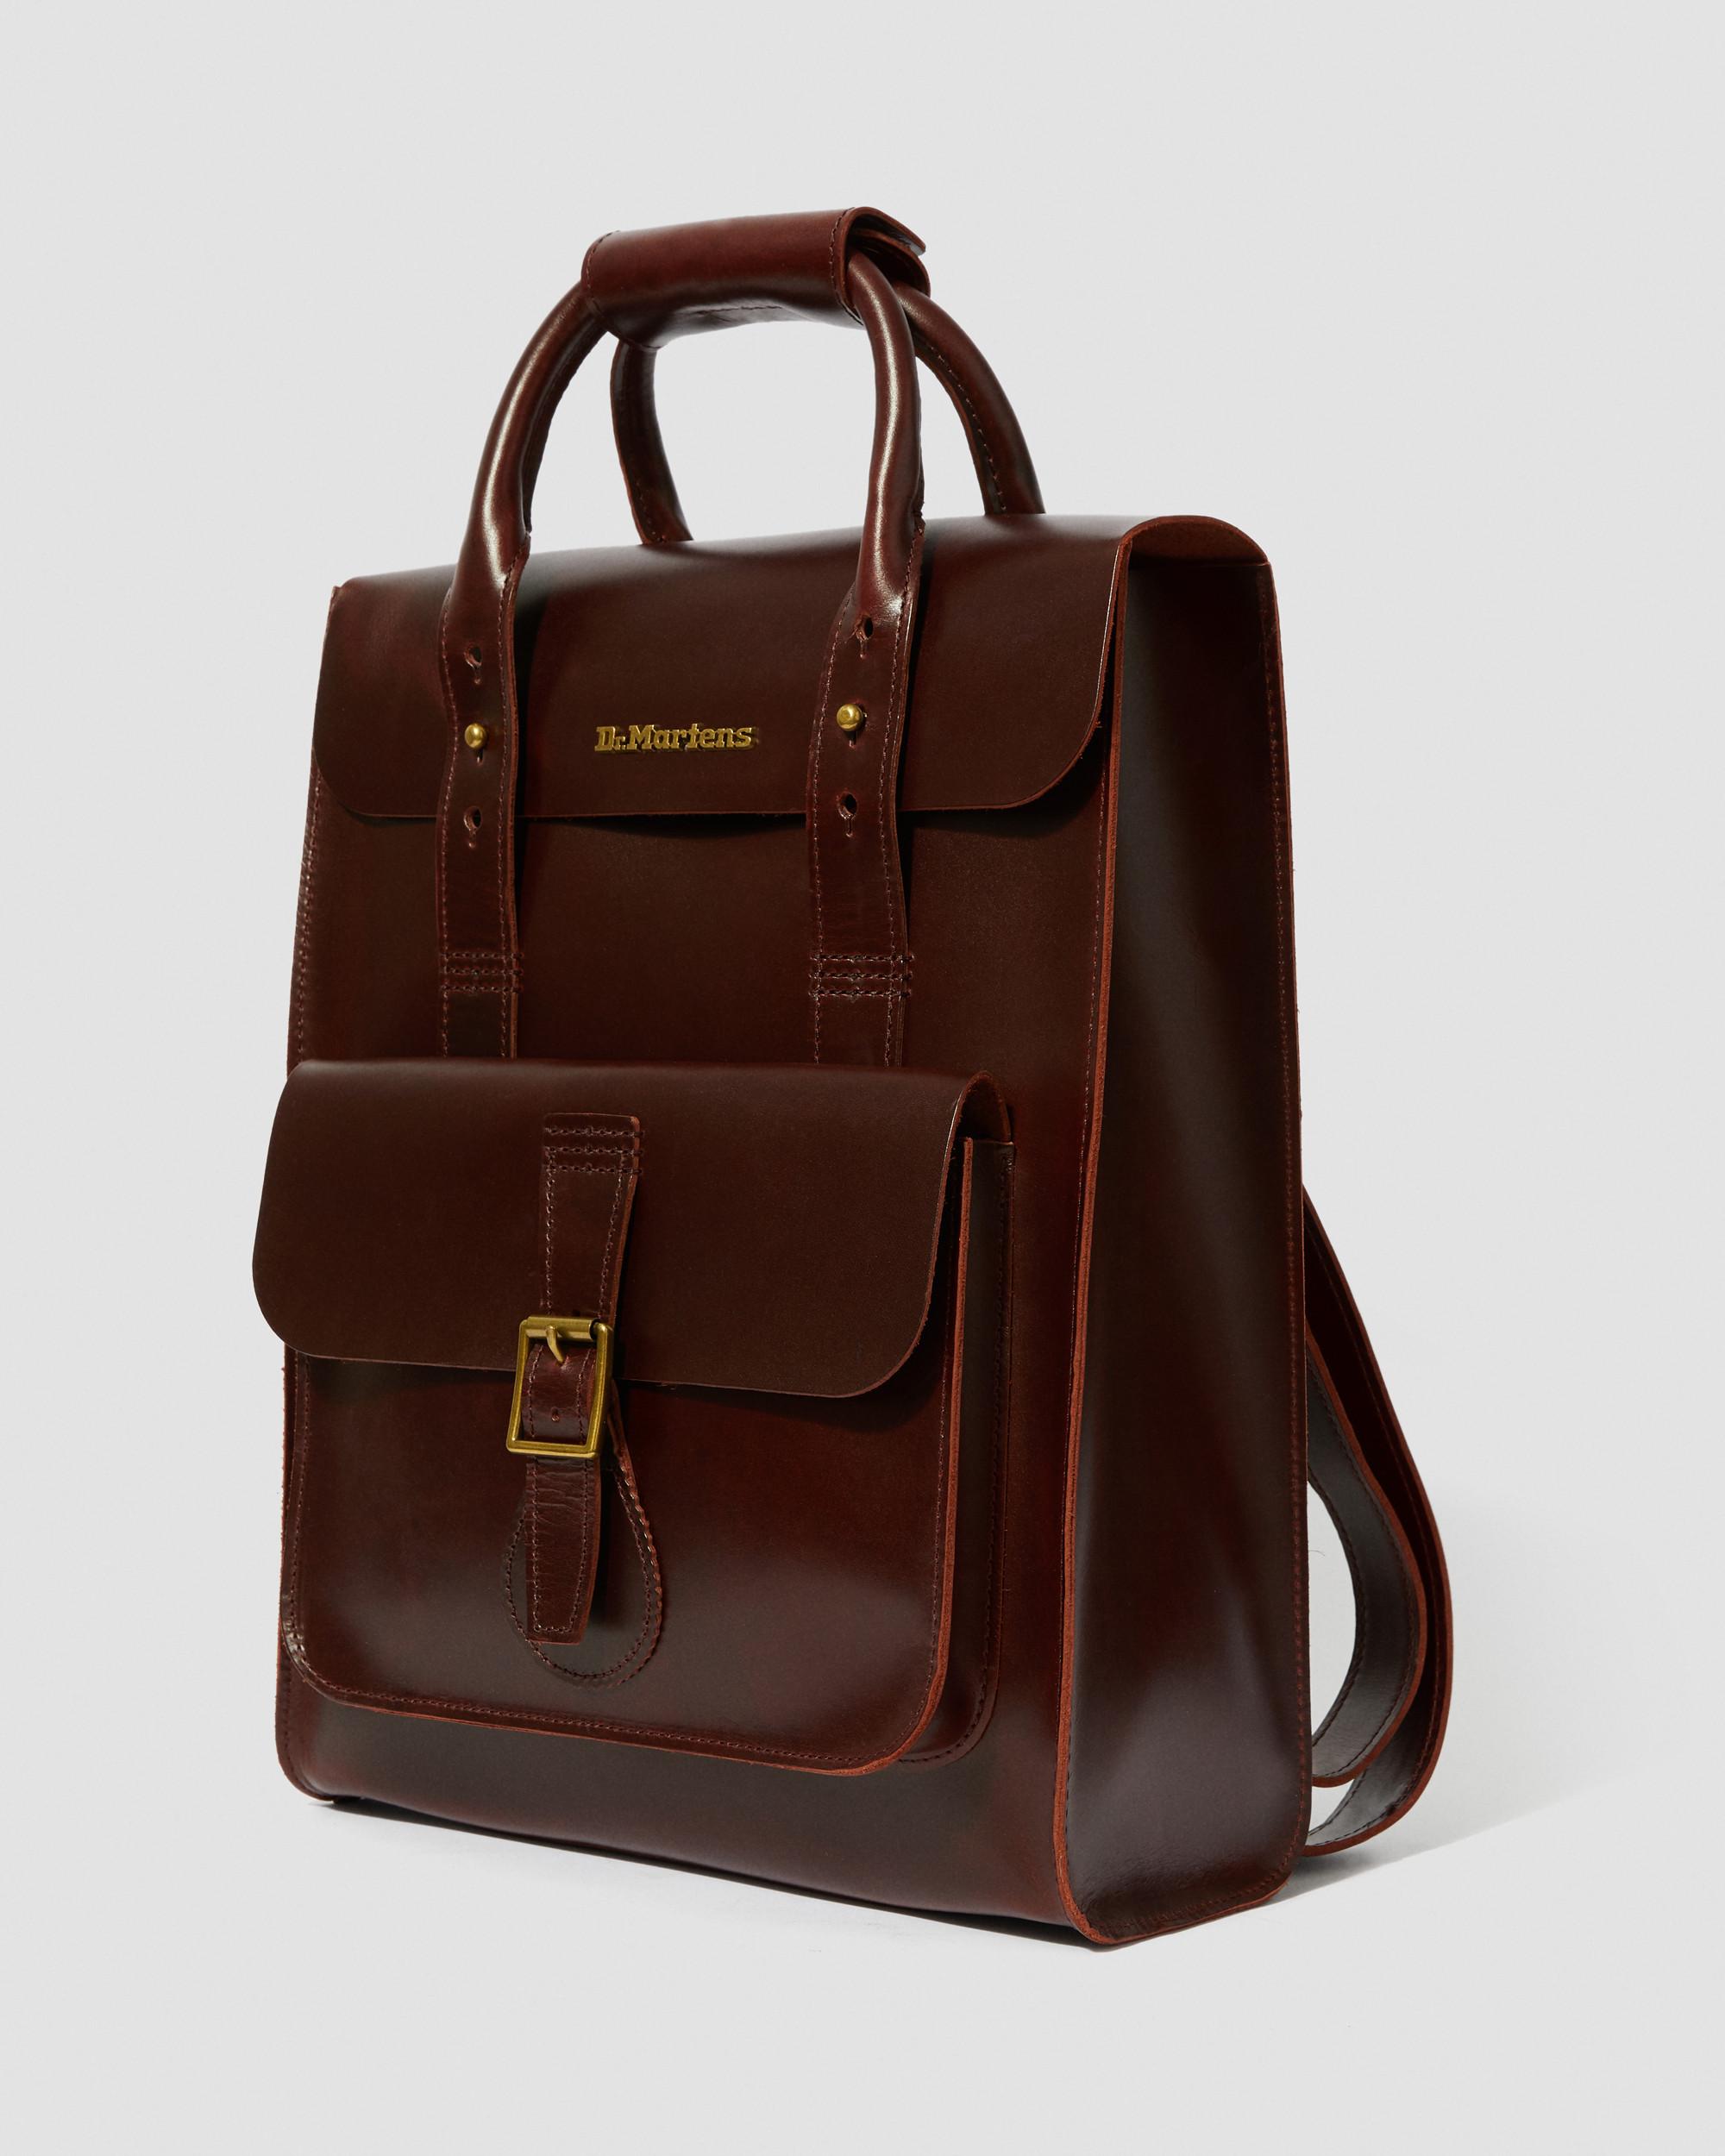 15 Inch Brando Leather Satchel in Brown